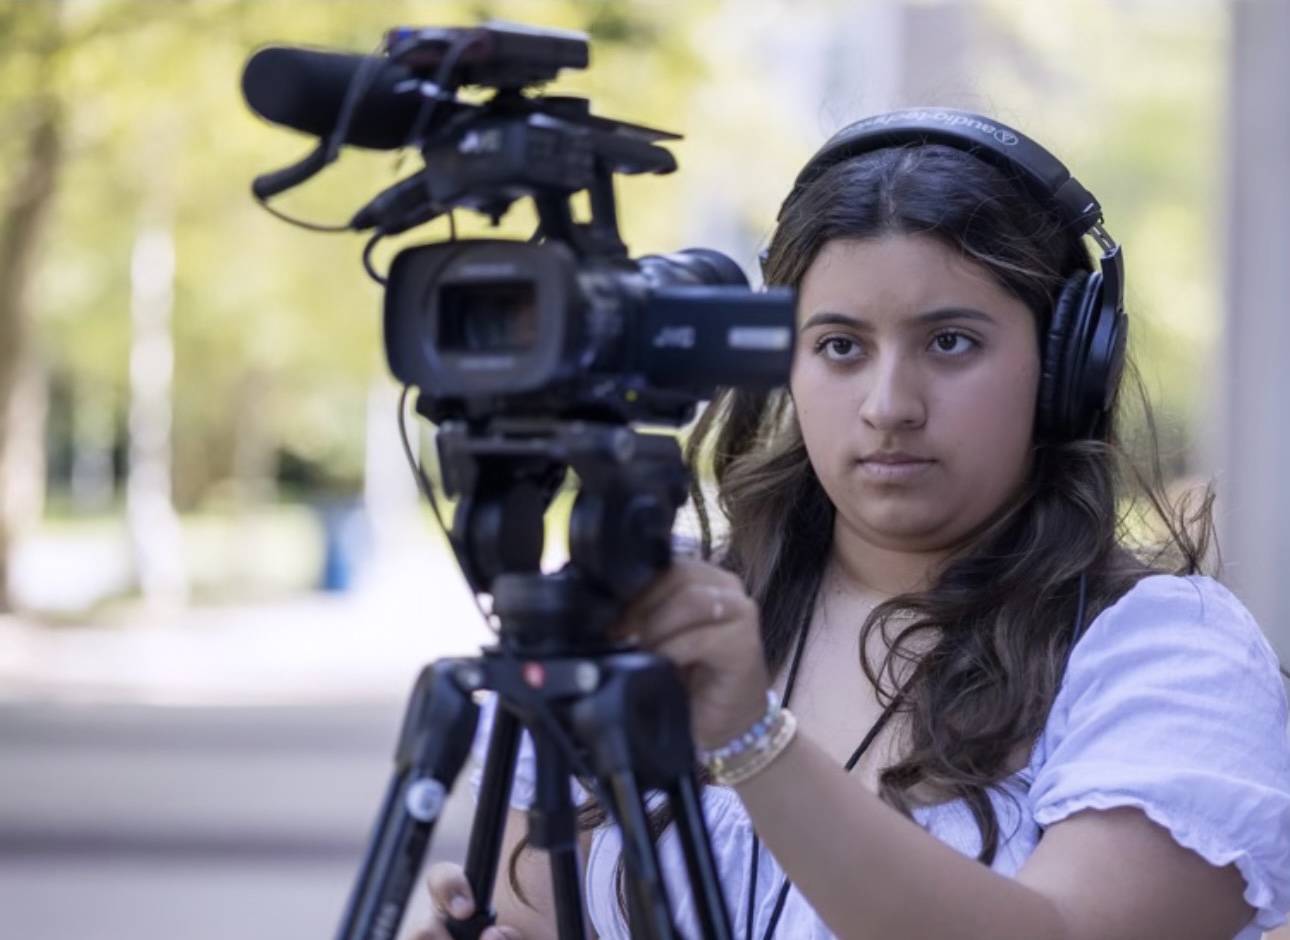 Galilea attended the Greene Institute for High School Journalists at Stony Brook University this summer. She had the opportunity to learn from Pulitzer Prize winning journalist Bill Bleyer and Newsday photographer John Williams